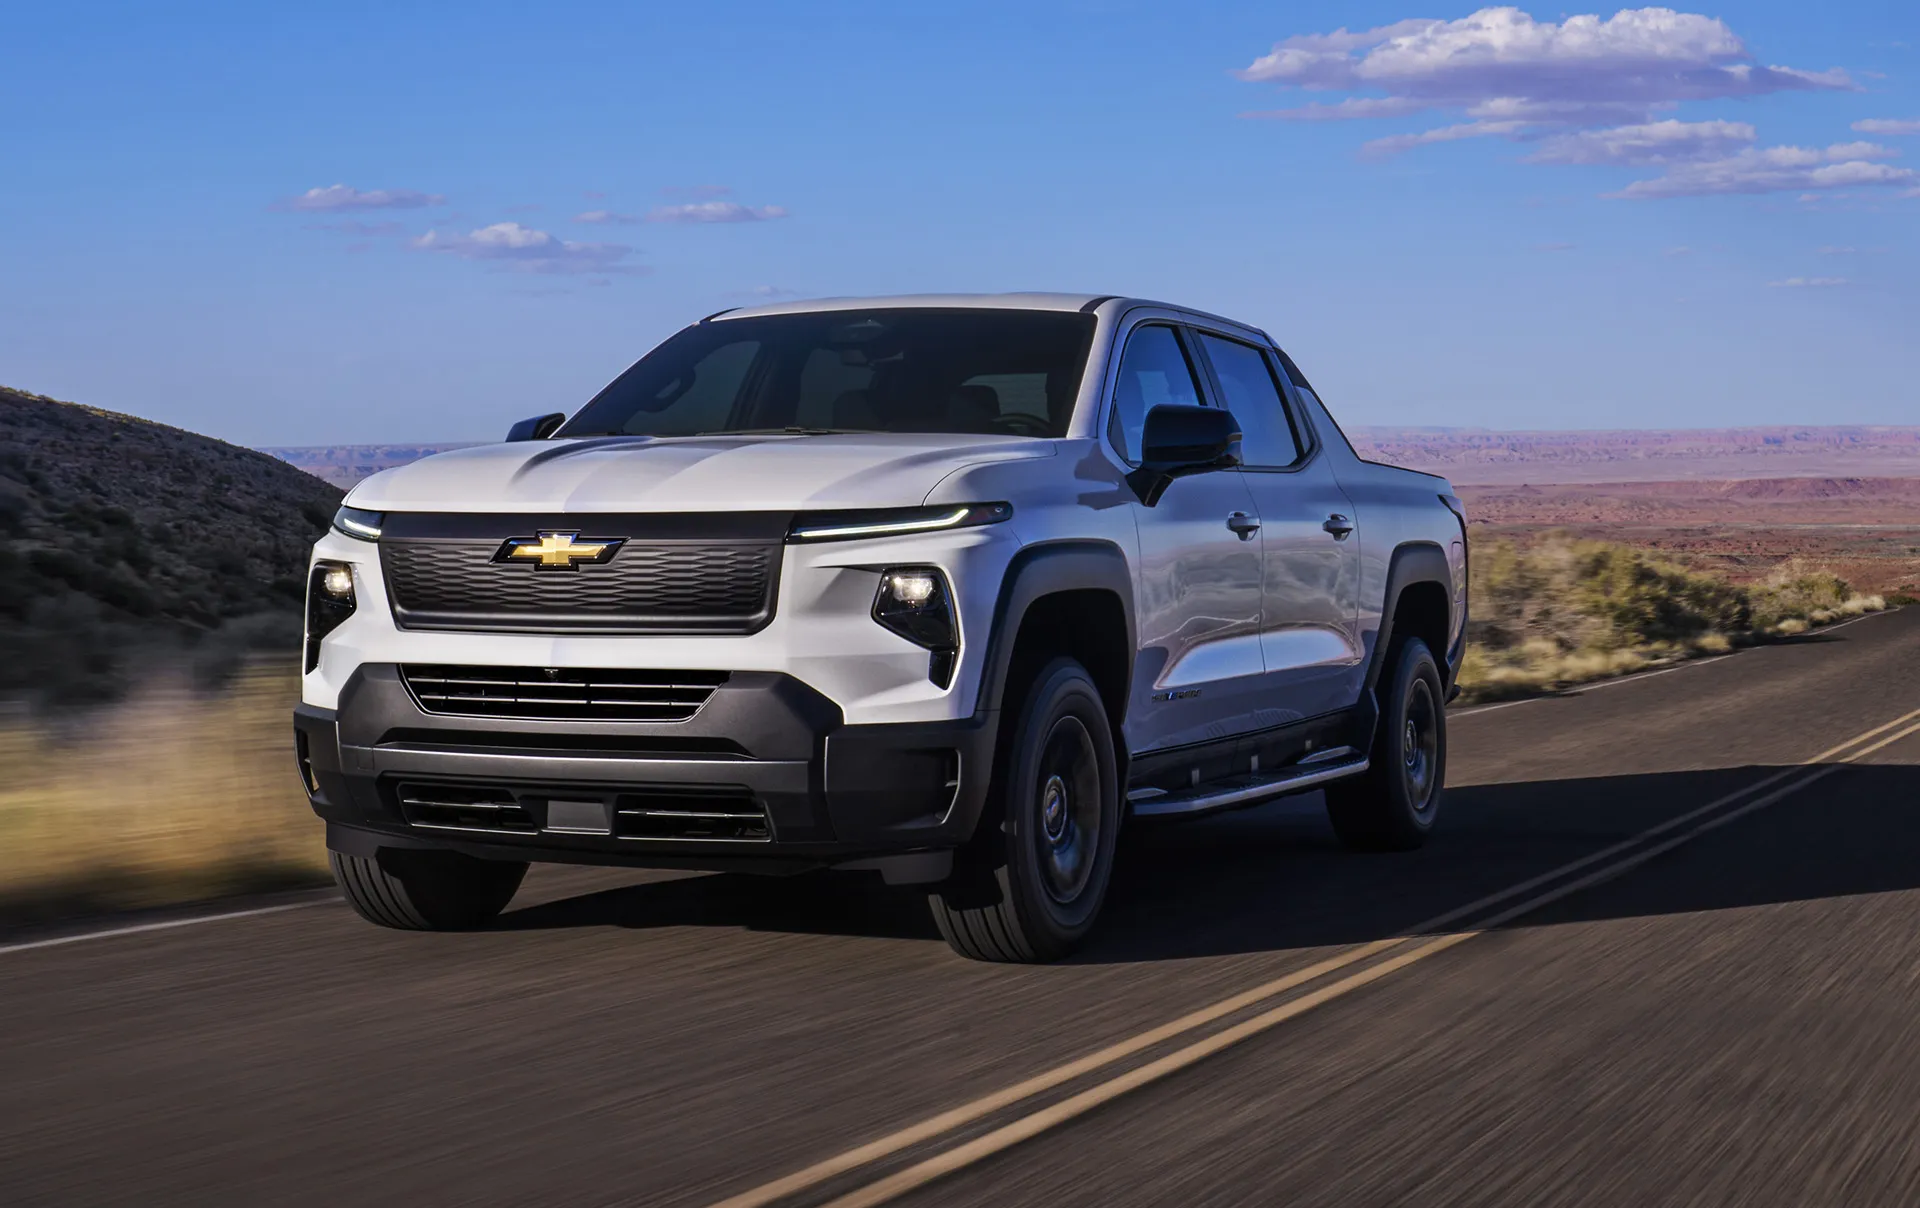 Chevrolet Silverado EV rated at 450 miles of range in work truck form